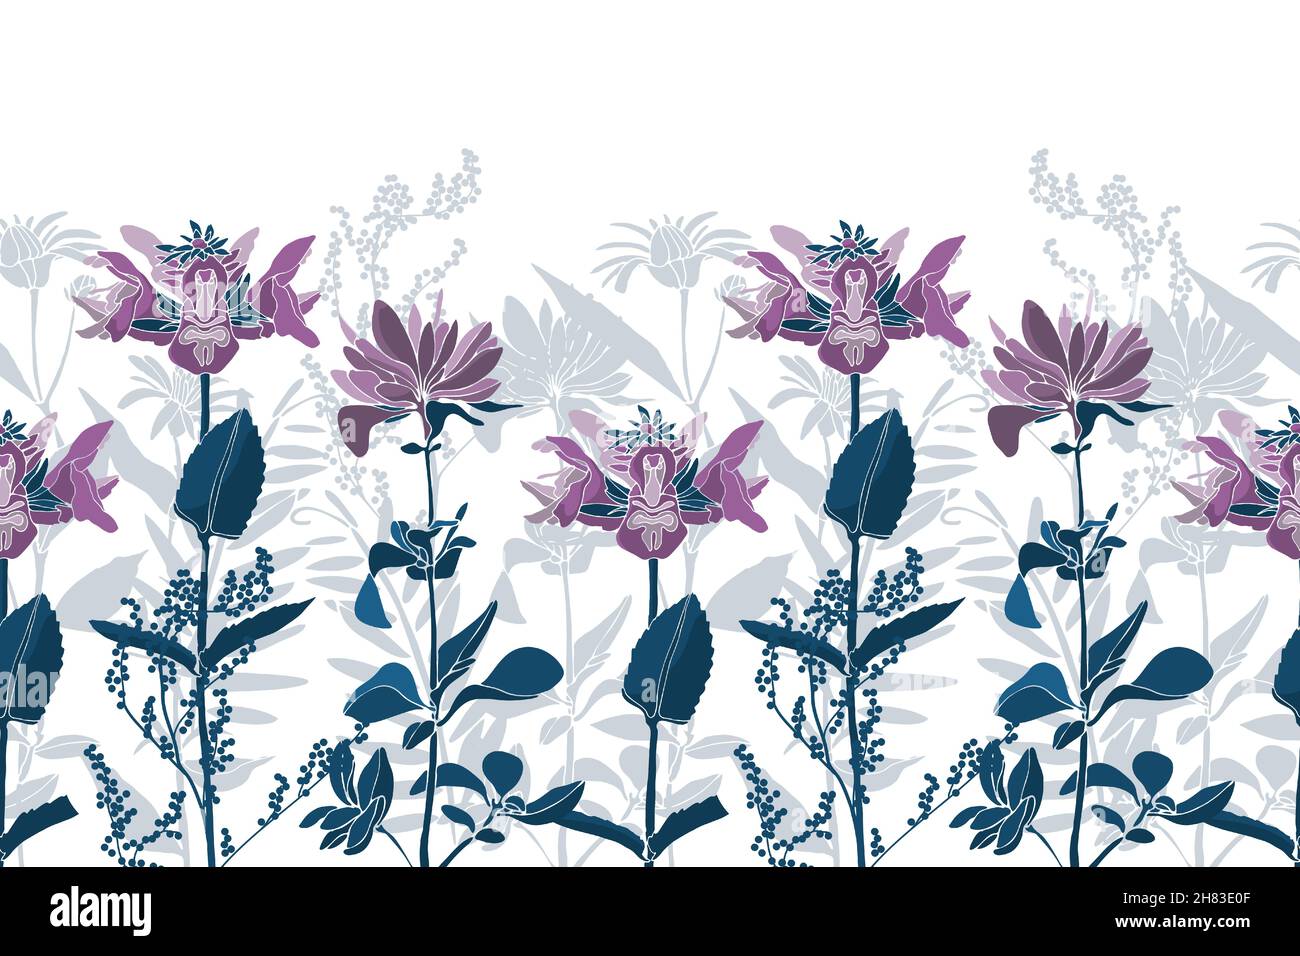 Vector floral seamless pattern, border. Violet flowers, marine colored twigs and leaves, gray shadows.  Stock Vector